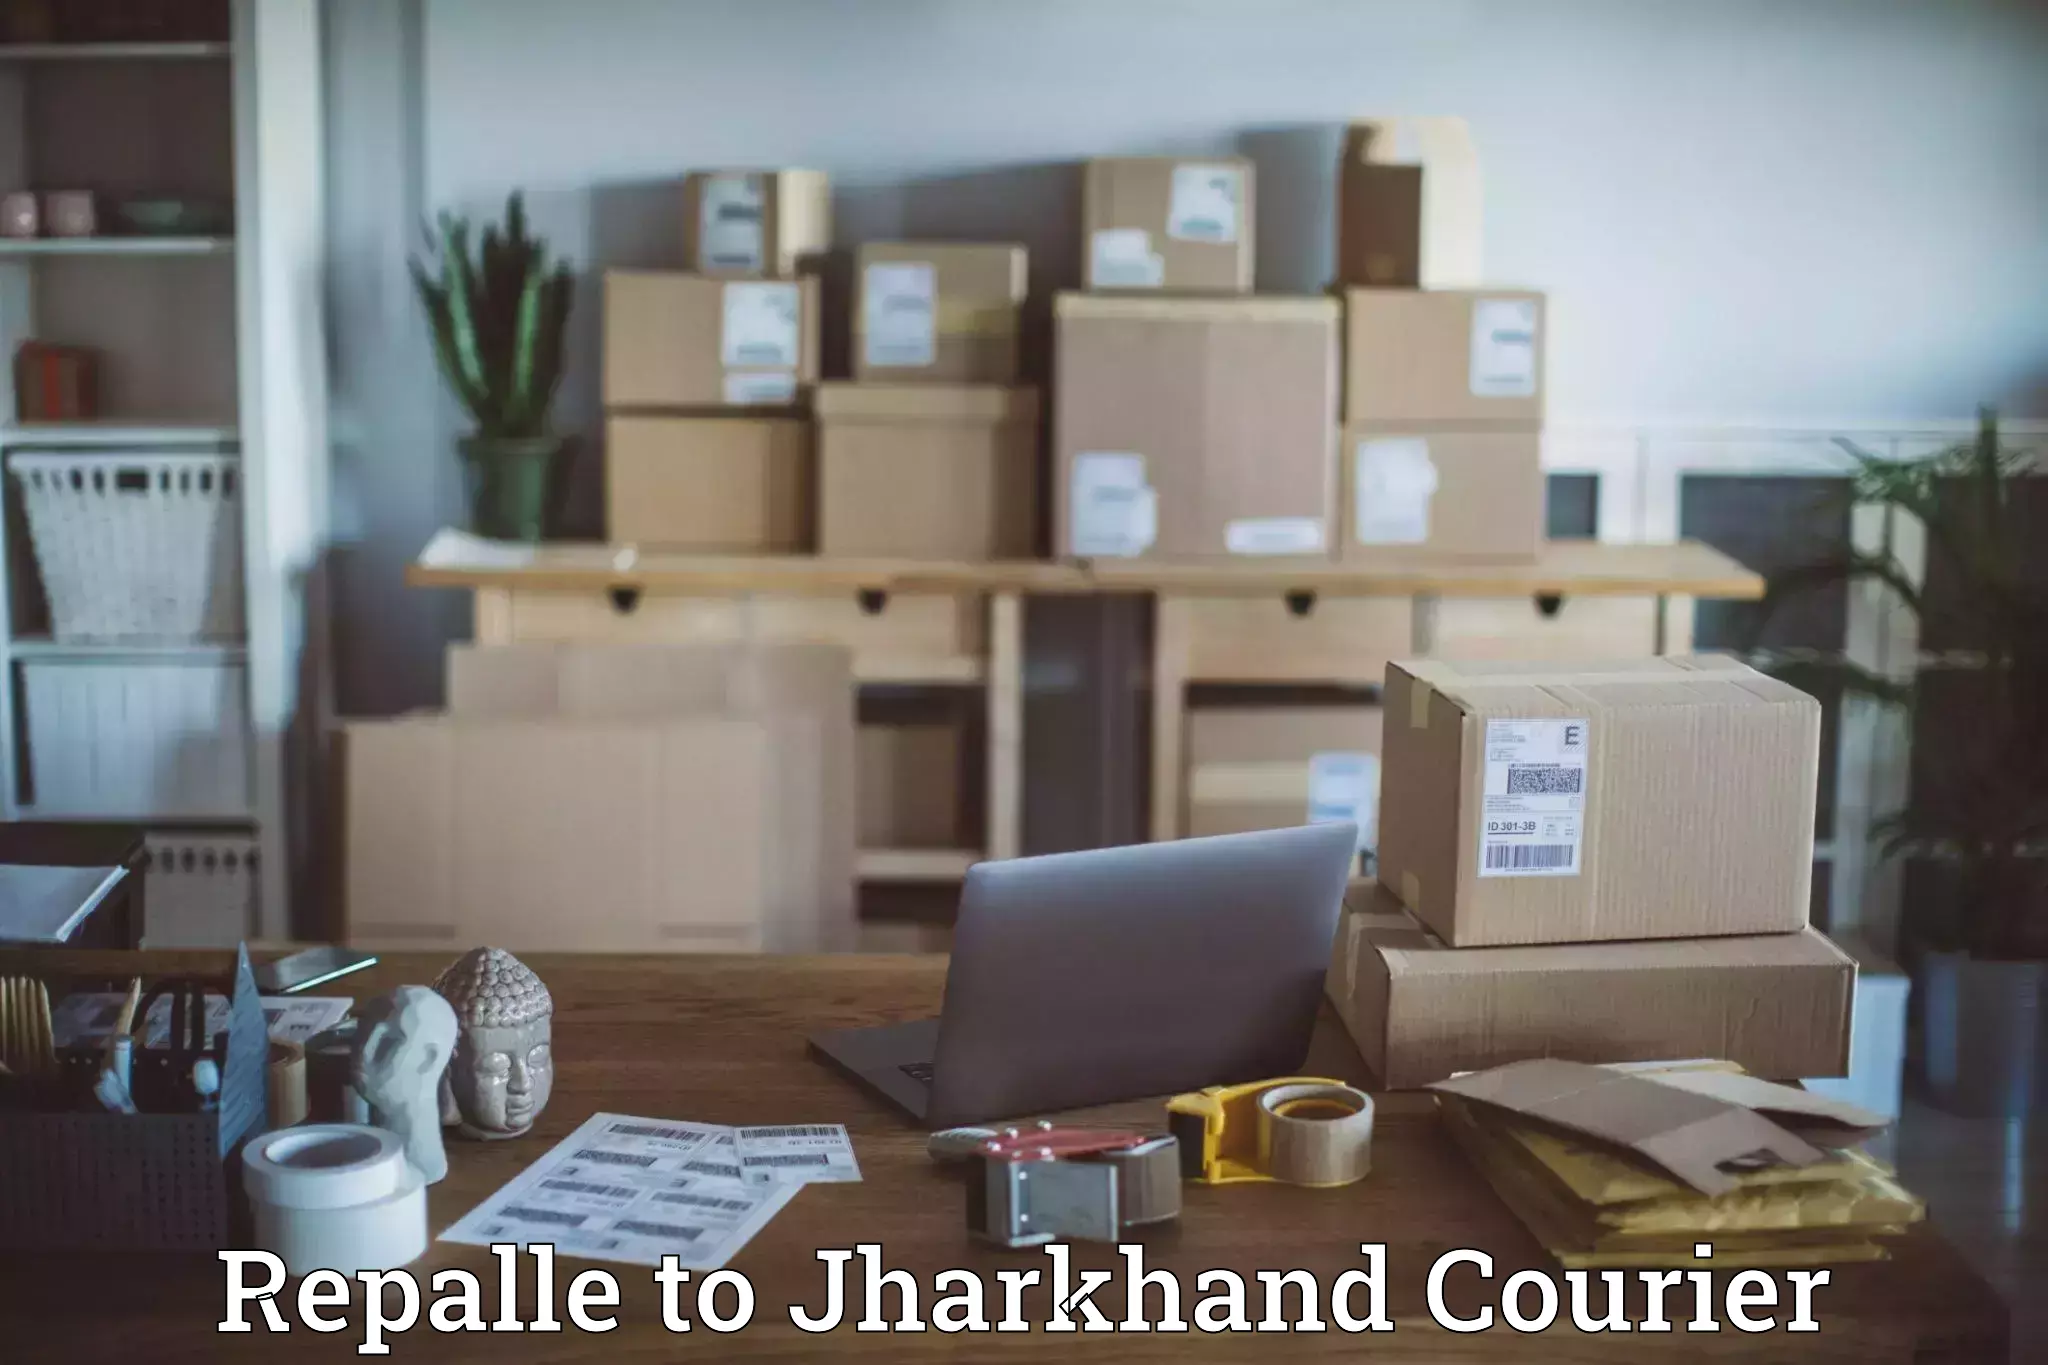 Advanced shipping services Repalle to Padma Hazaribagh